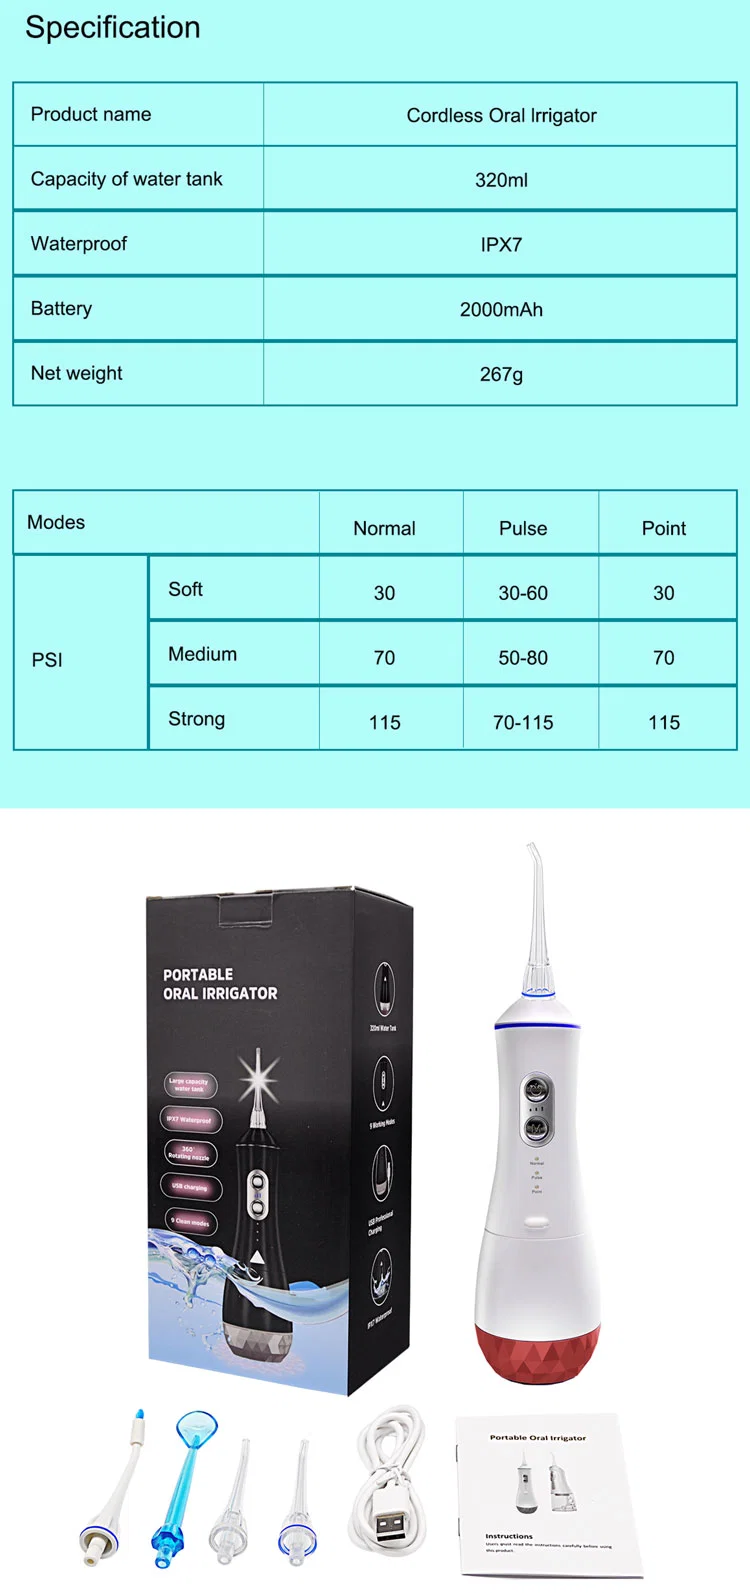 My-M188 Household Device USB Rechargeable Water Flosser Deep Cleaning 320ml Dental Oral Irrigator 2021